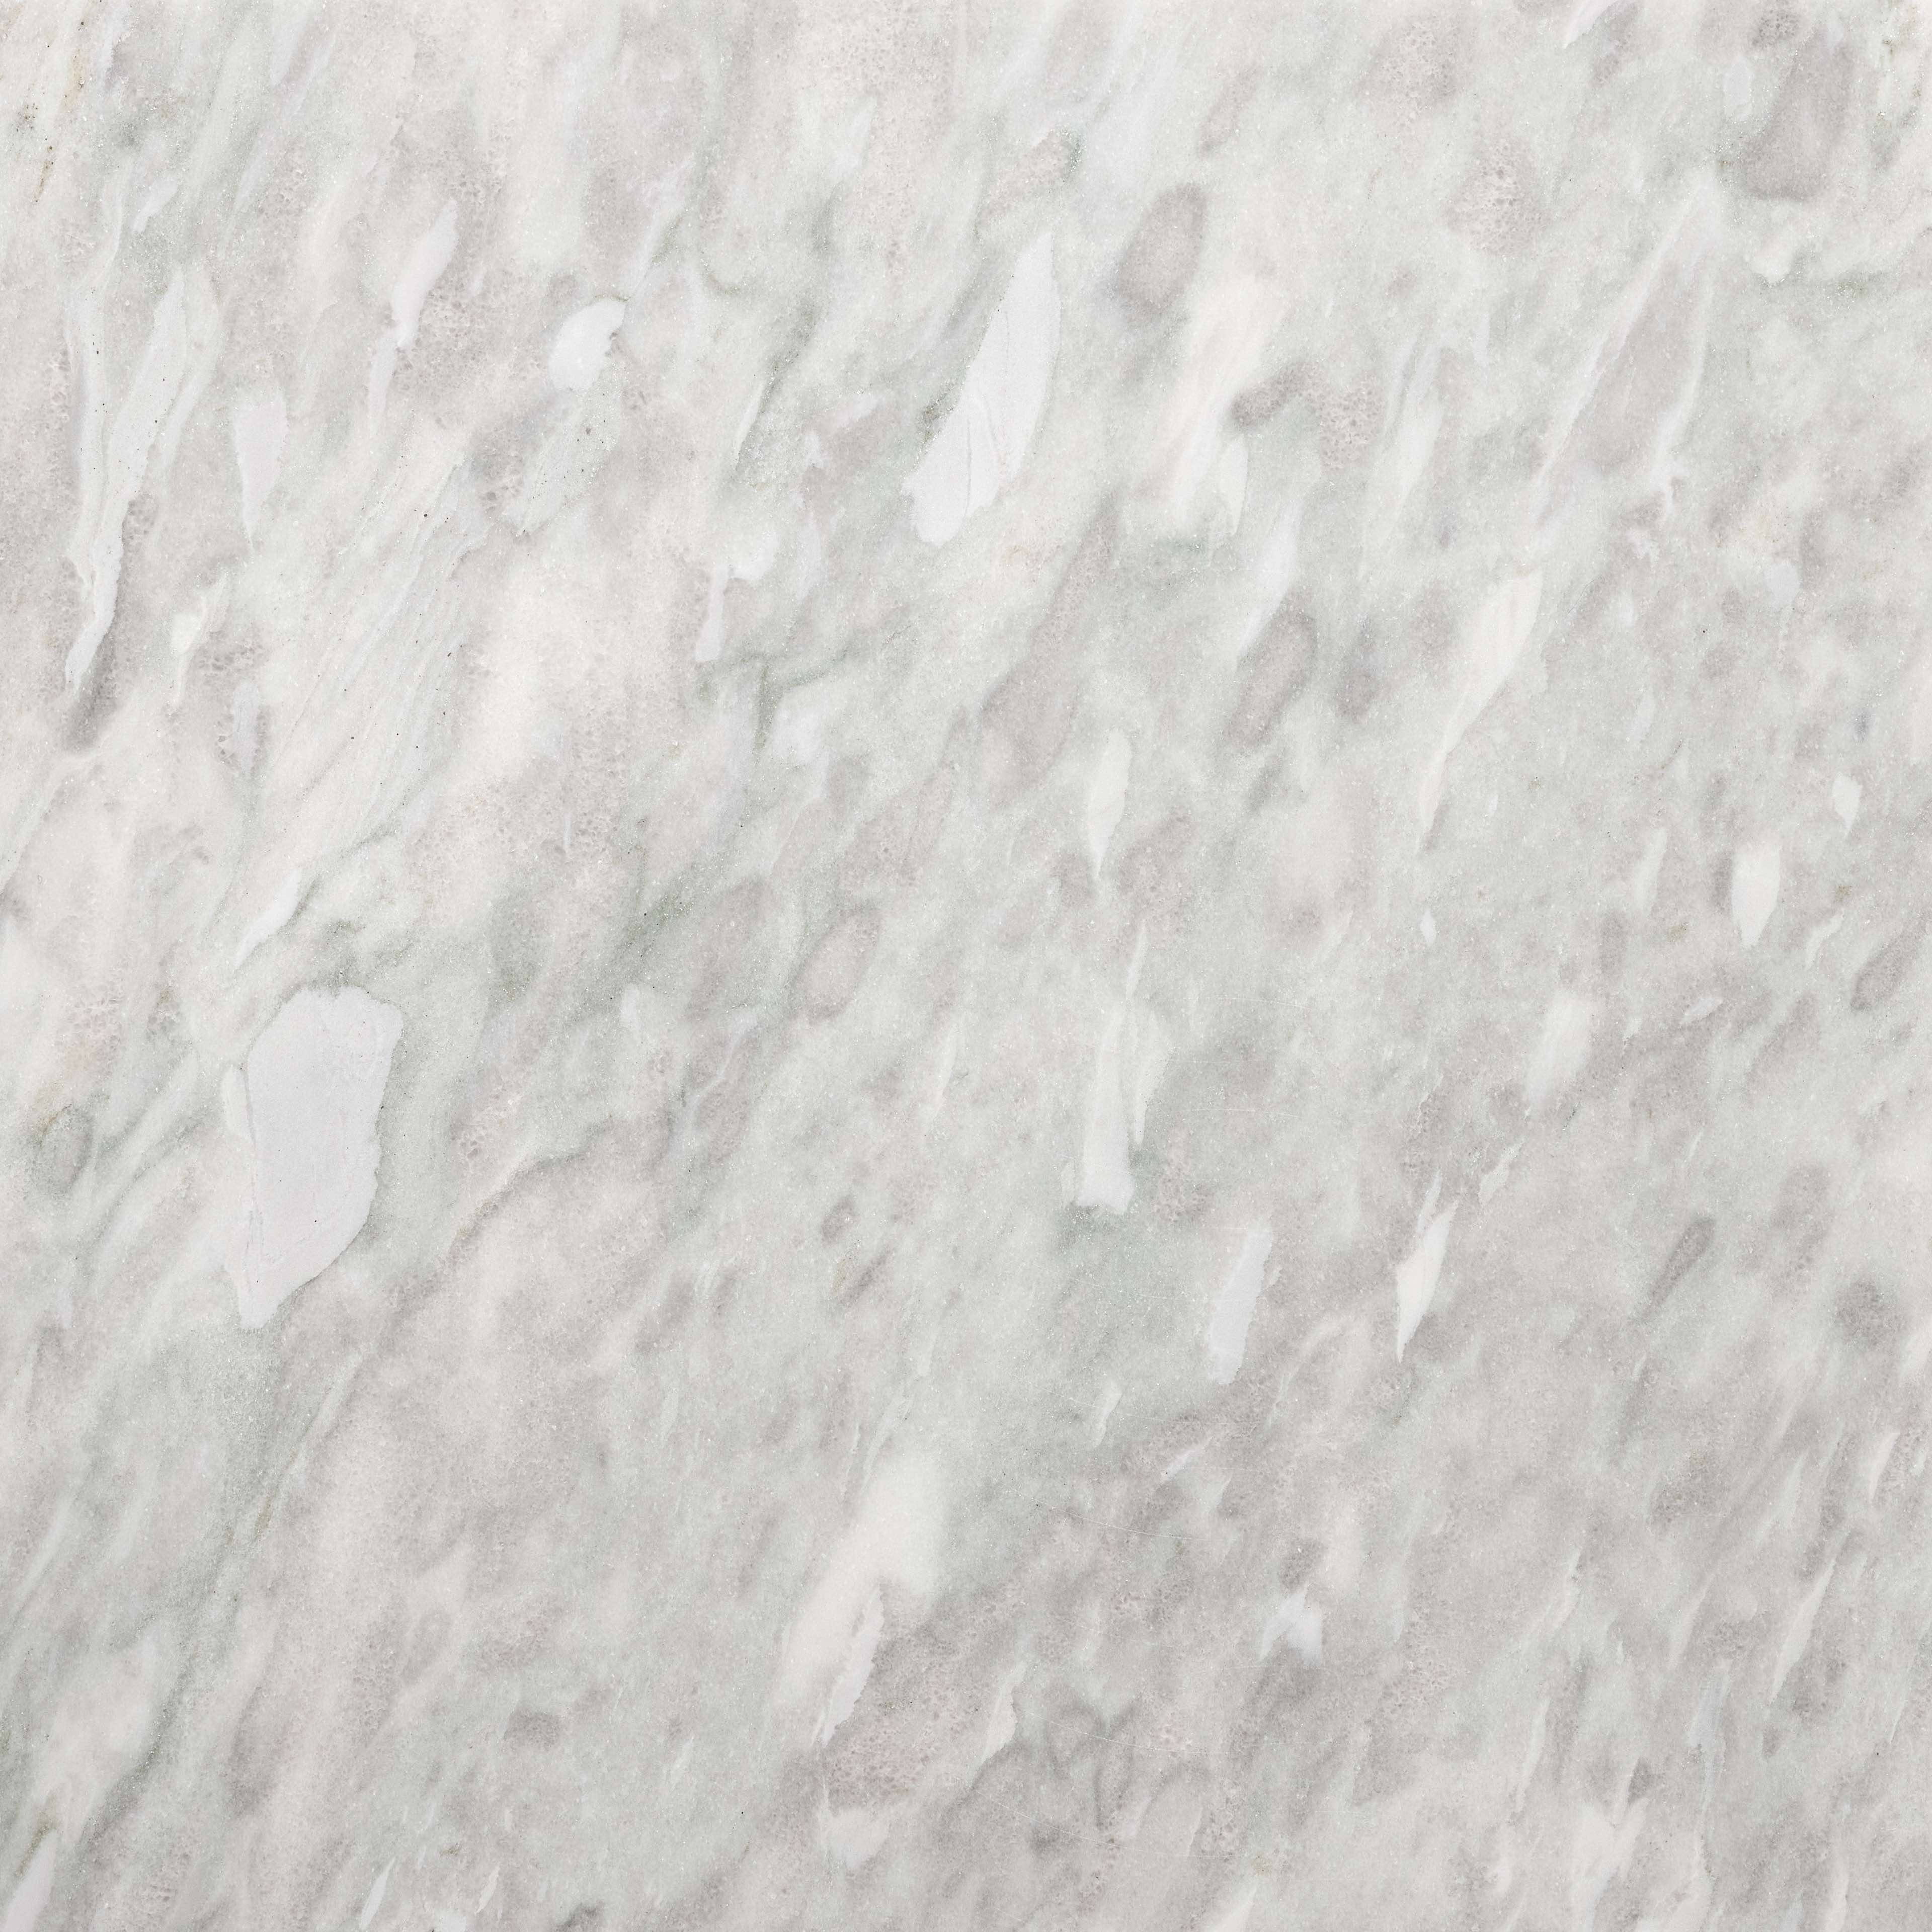 Fauske Marble Silver Green Honed